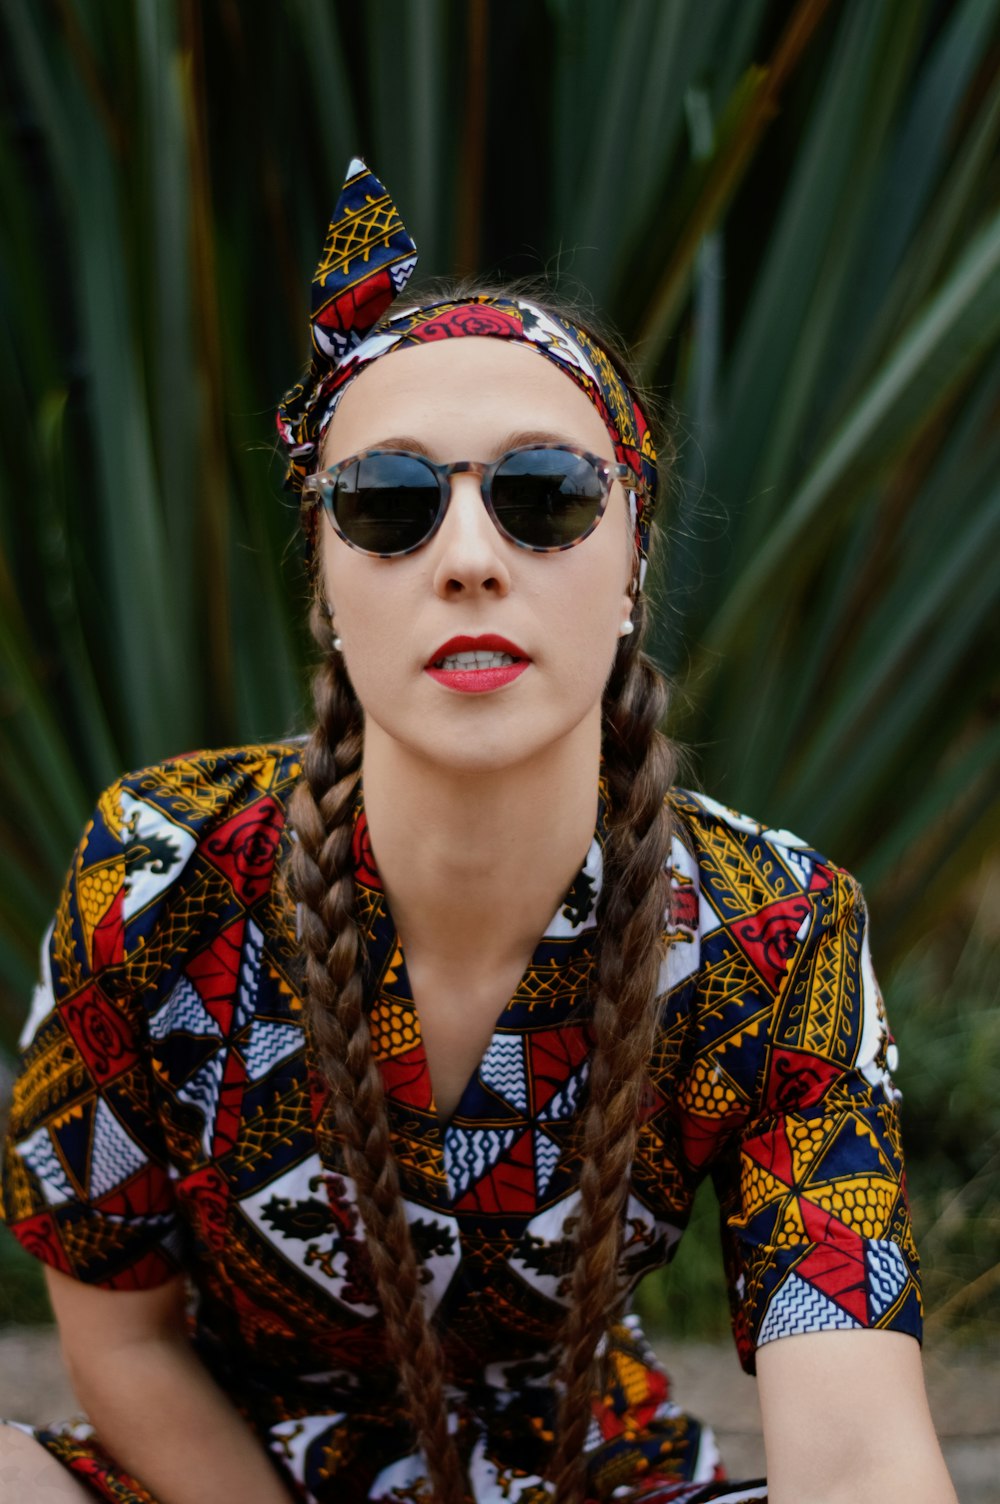 a woman sitting on the ground wearing sunglasses and a headband